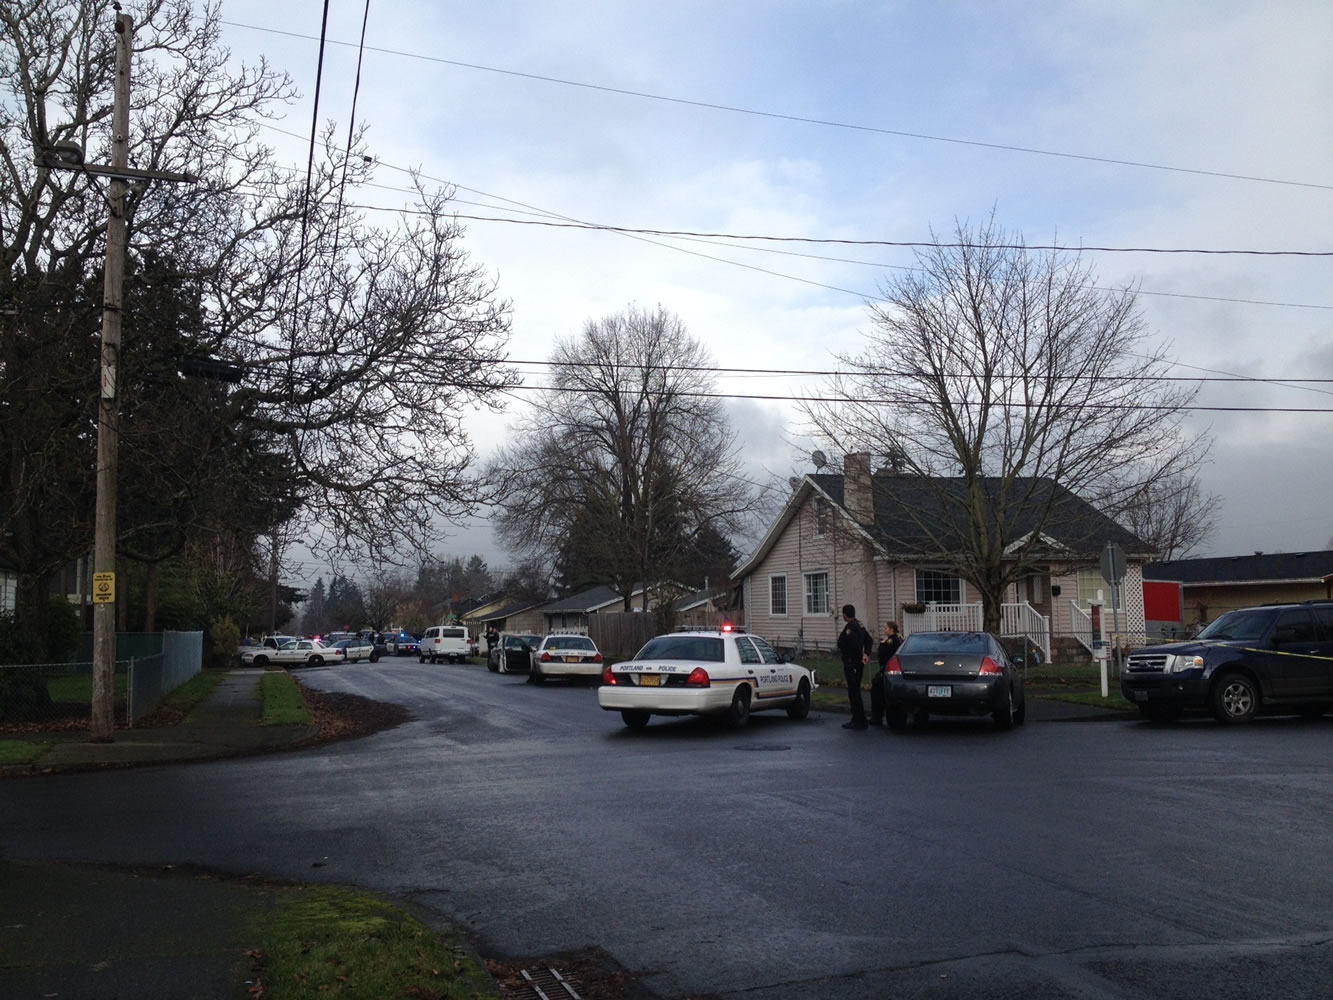 A high-speed police chase that started in Vancouver, ended in a residential area of Portland about 25 blocks north of University of Portland.